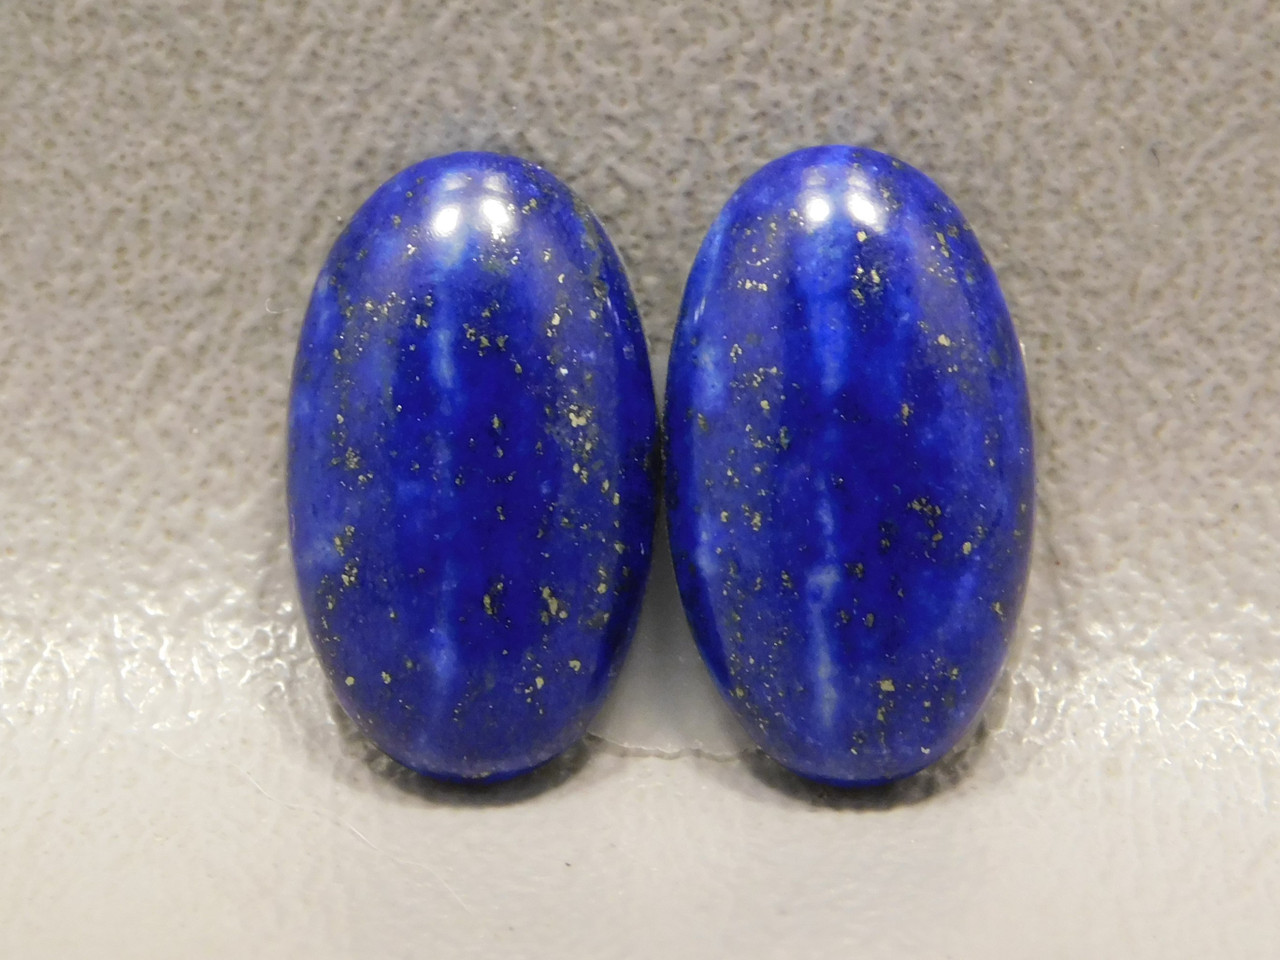 Navy Blue and Gold Pyrite Lapis Lazuli Matched Pair Stone Cabochons #3